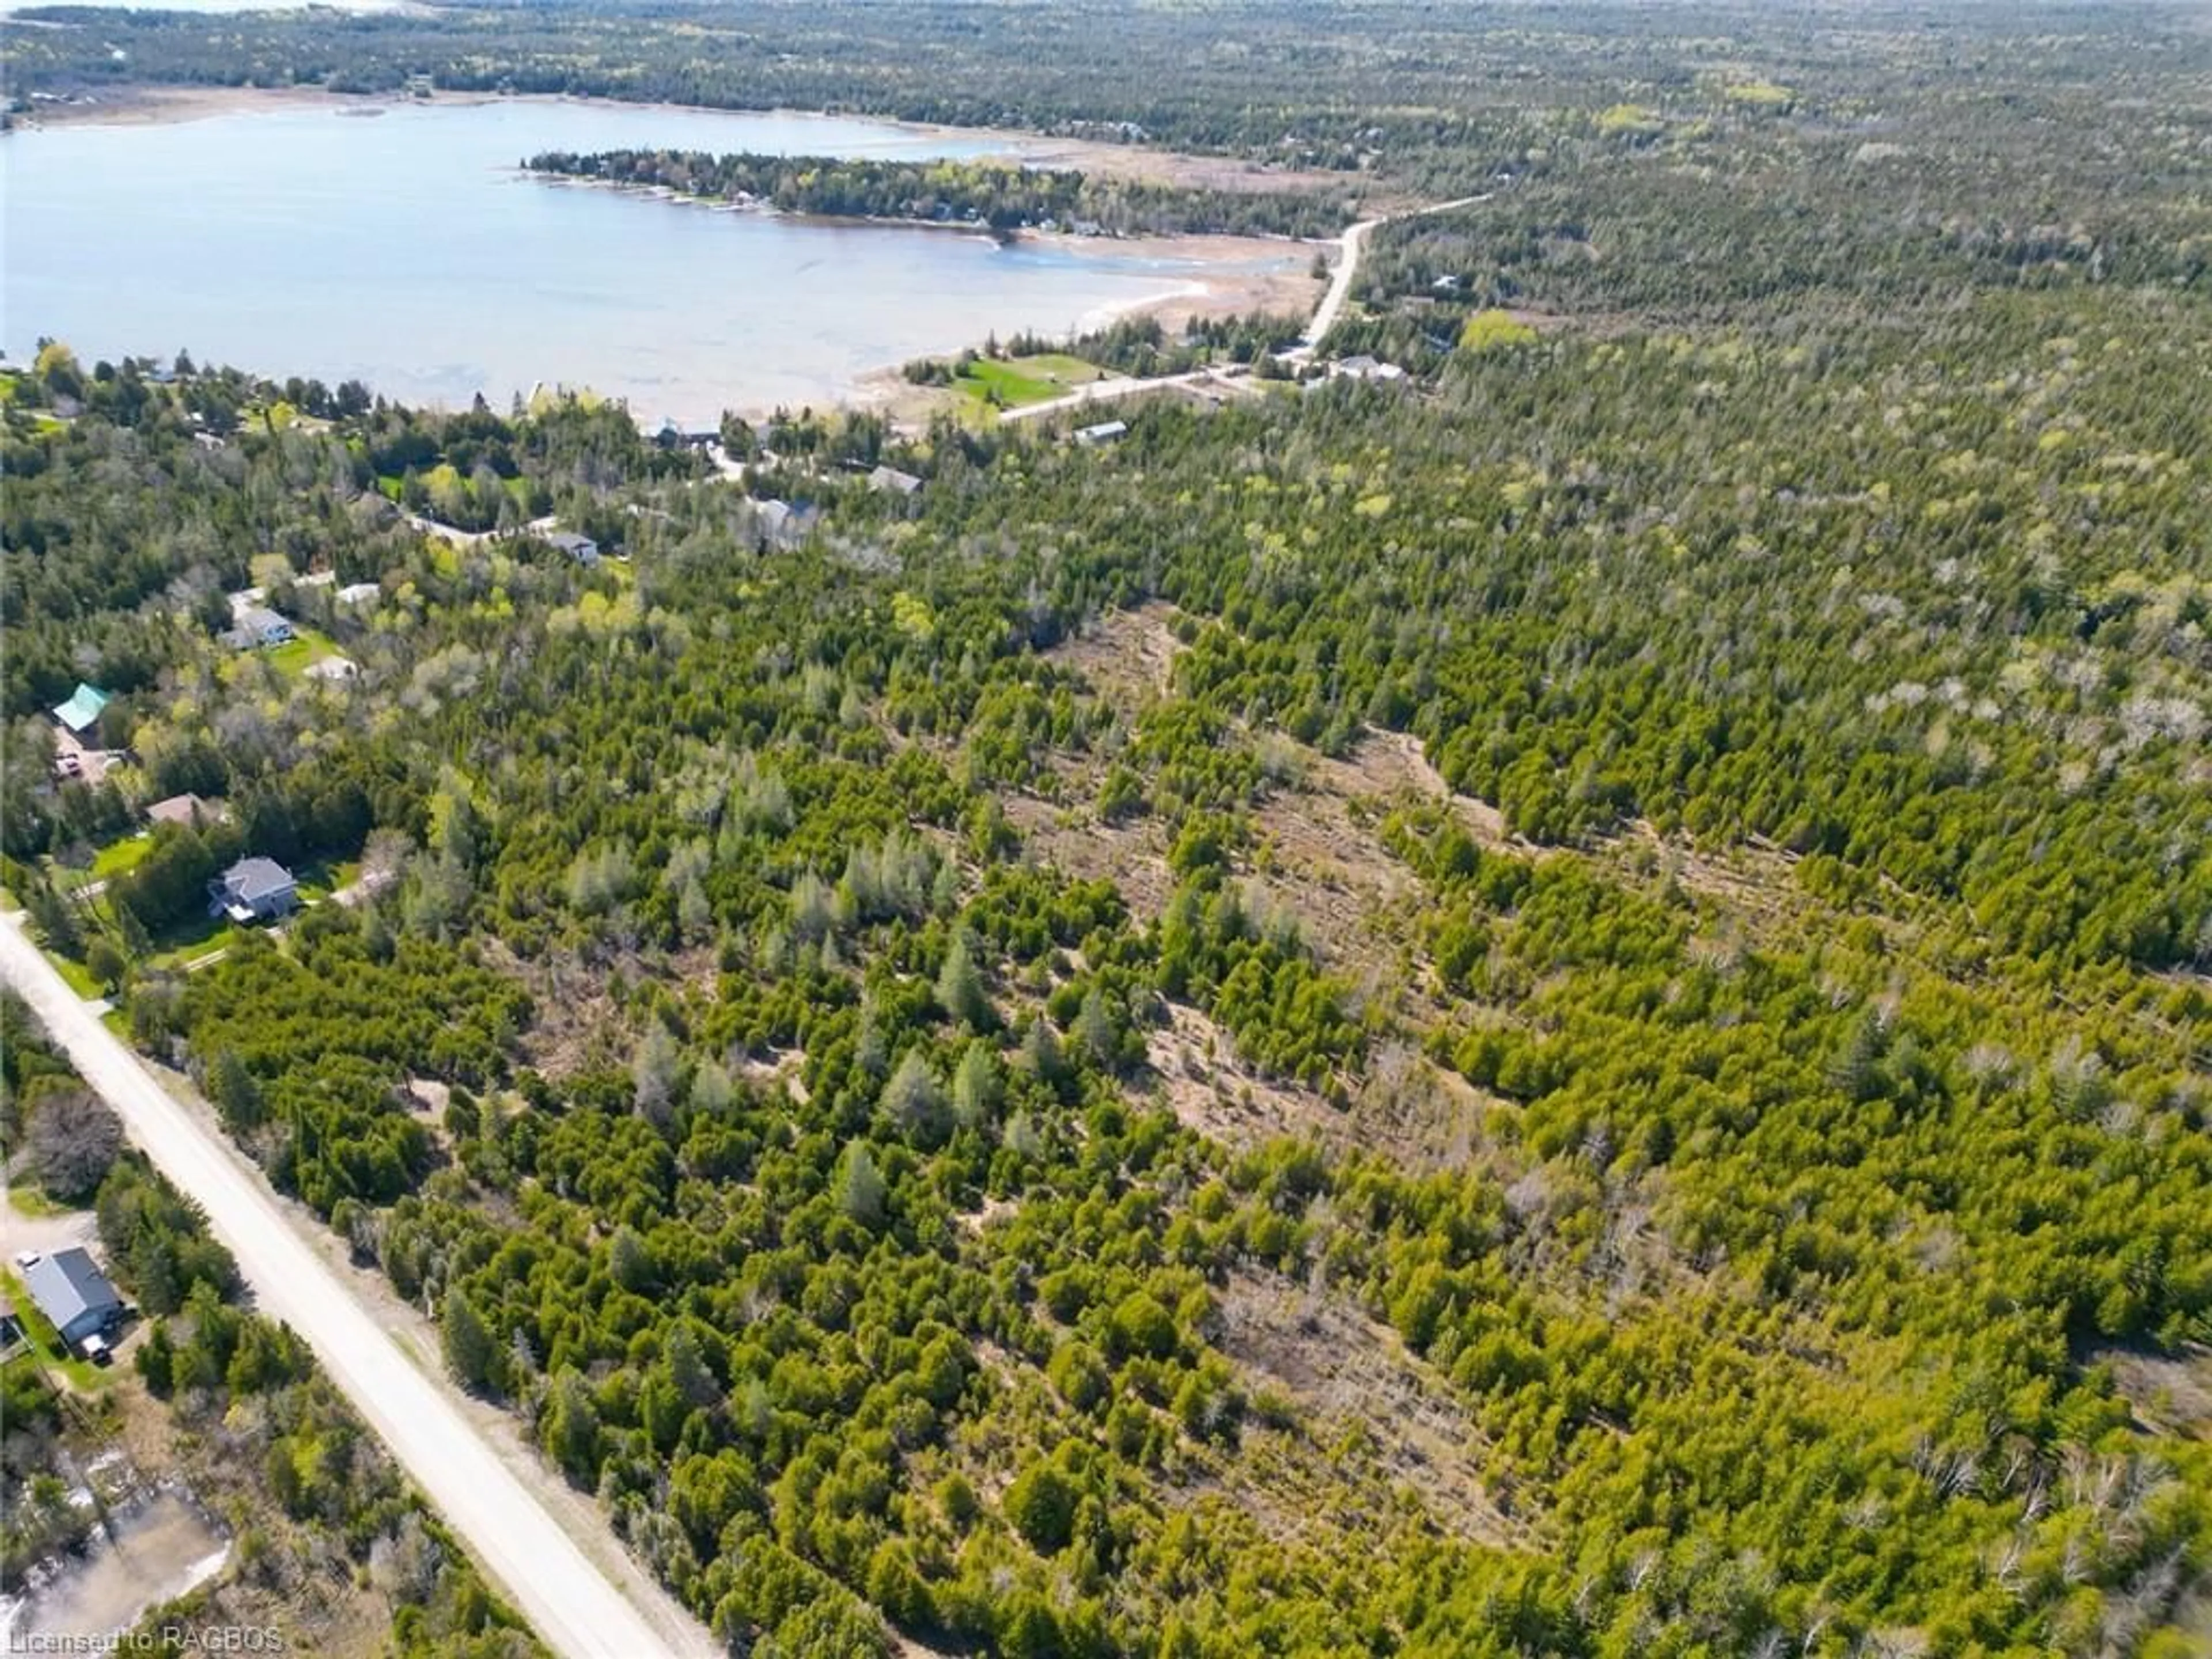 Lakeview for PT LT 2 Concession 4 Wbr, Northern Bruce Peninsula Ontario N0H 2T0